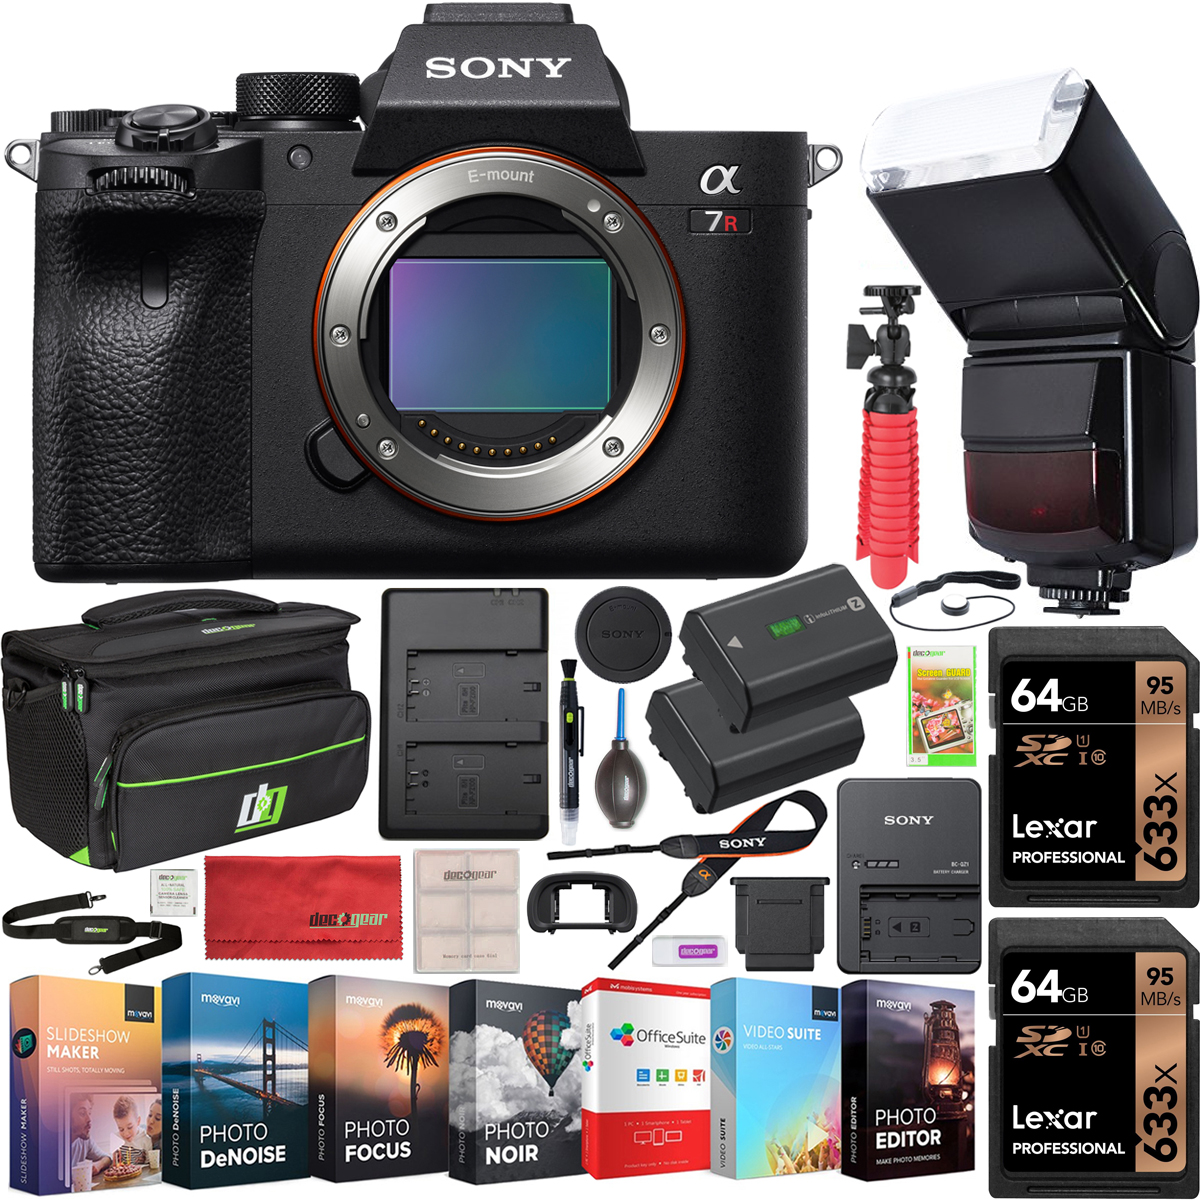 Sony a7R IV 61.0MP Full-Frame Mirrorless Interchangeable Lens Camera Body ILCE-7RM4 4K Bundle 128GB - image 1 of 10